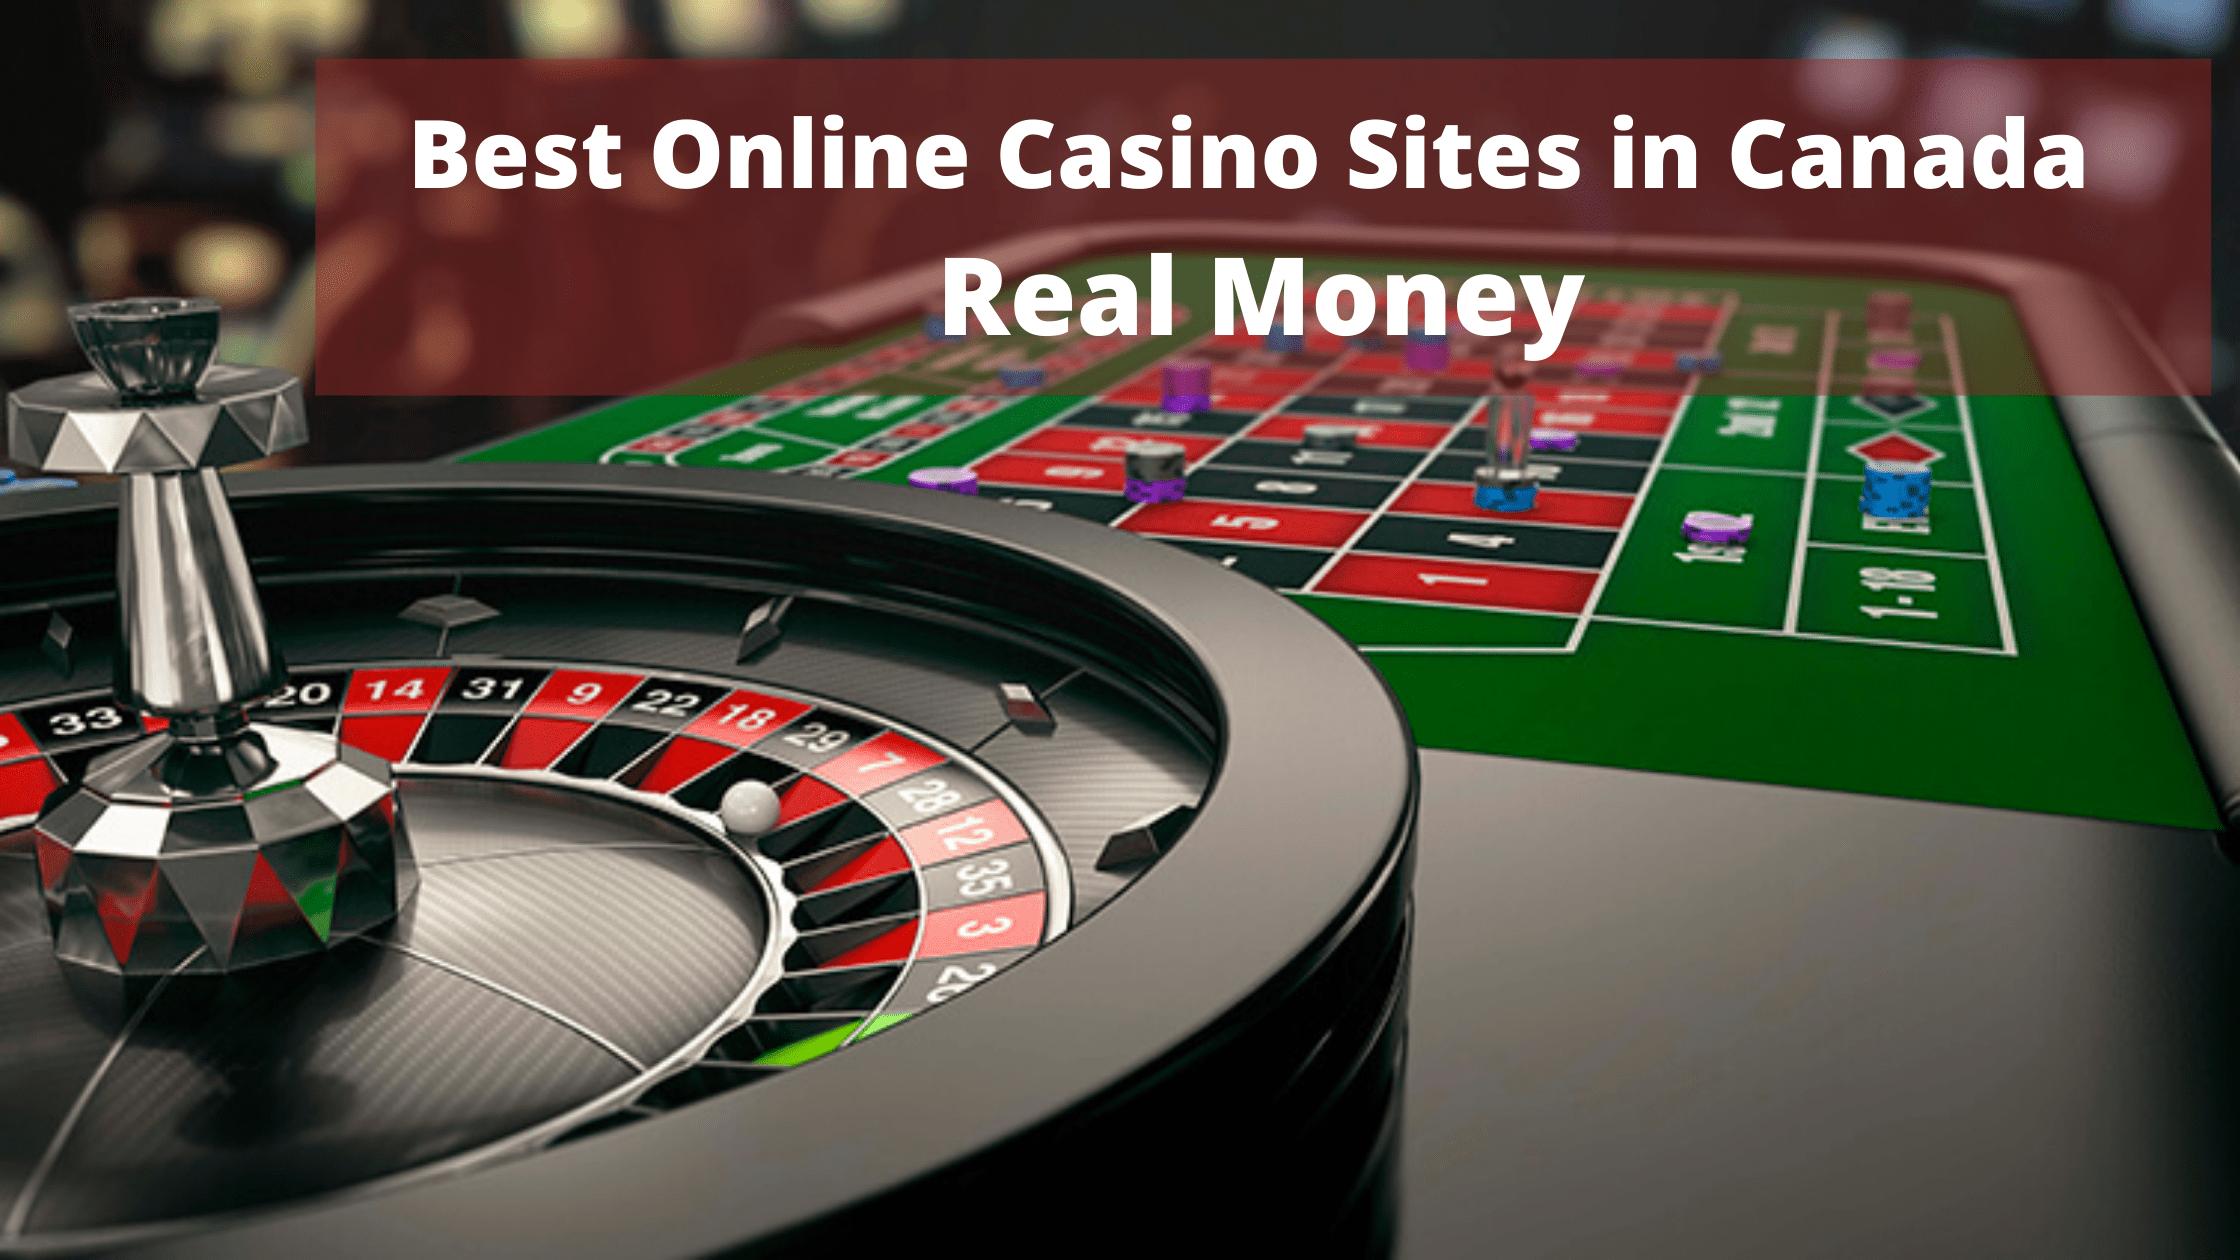 Best Online Casino Sites in Canada for Real Money